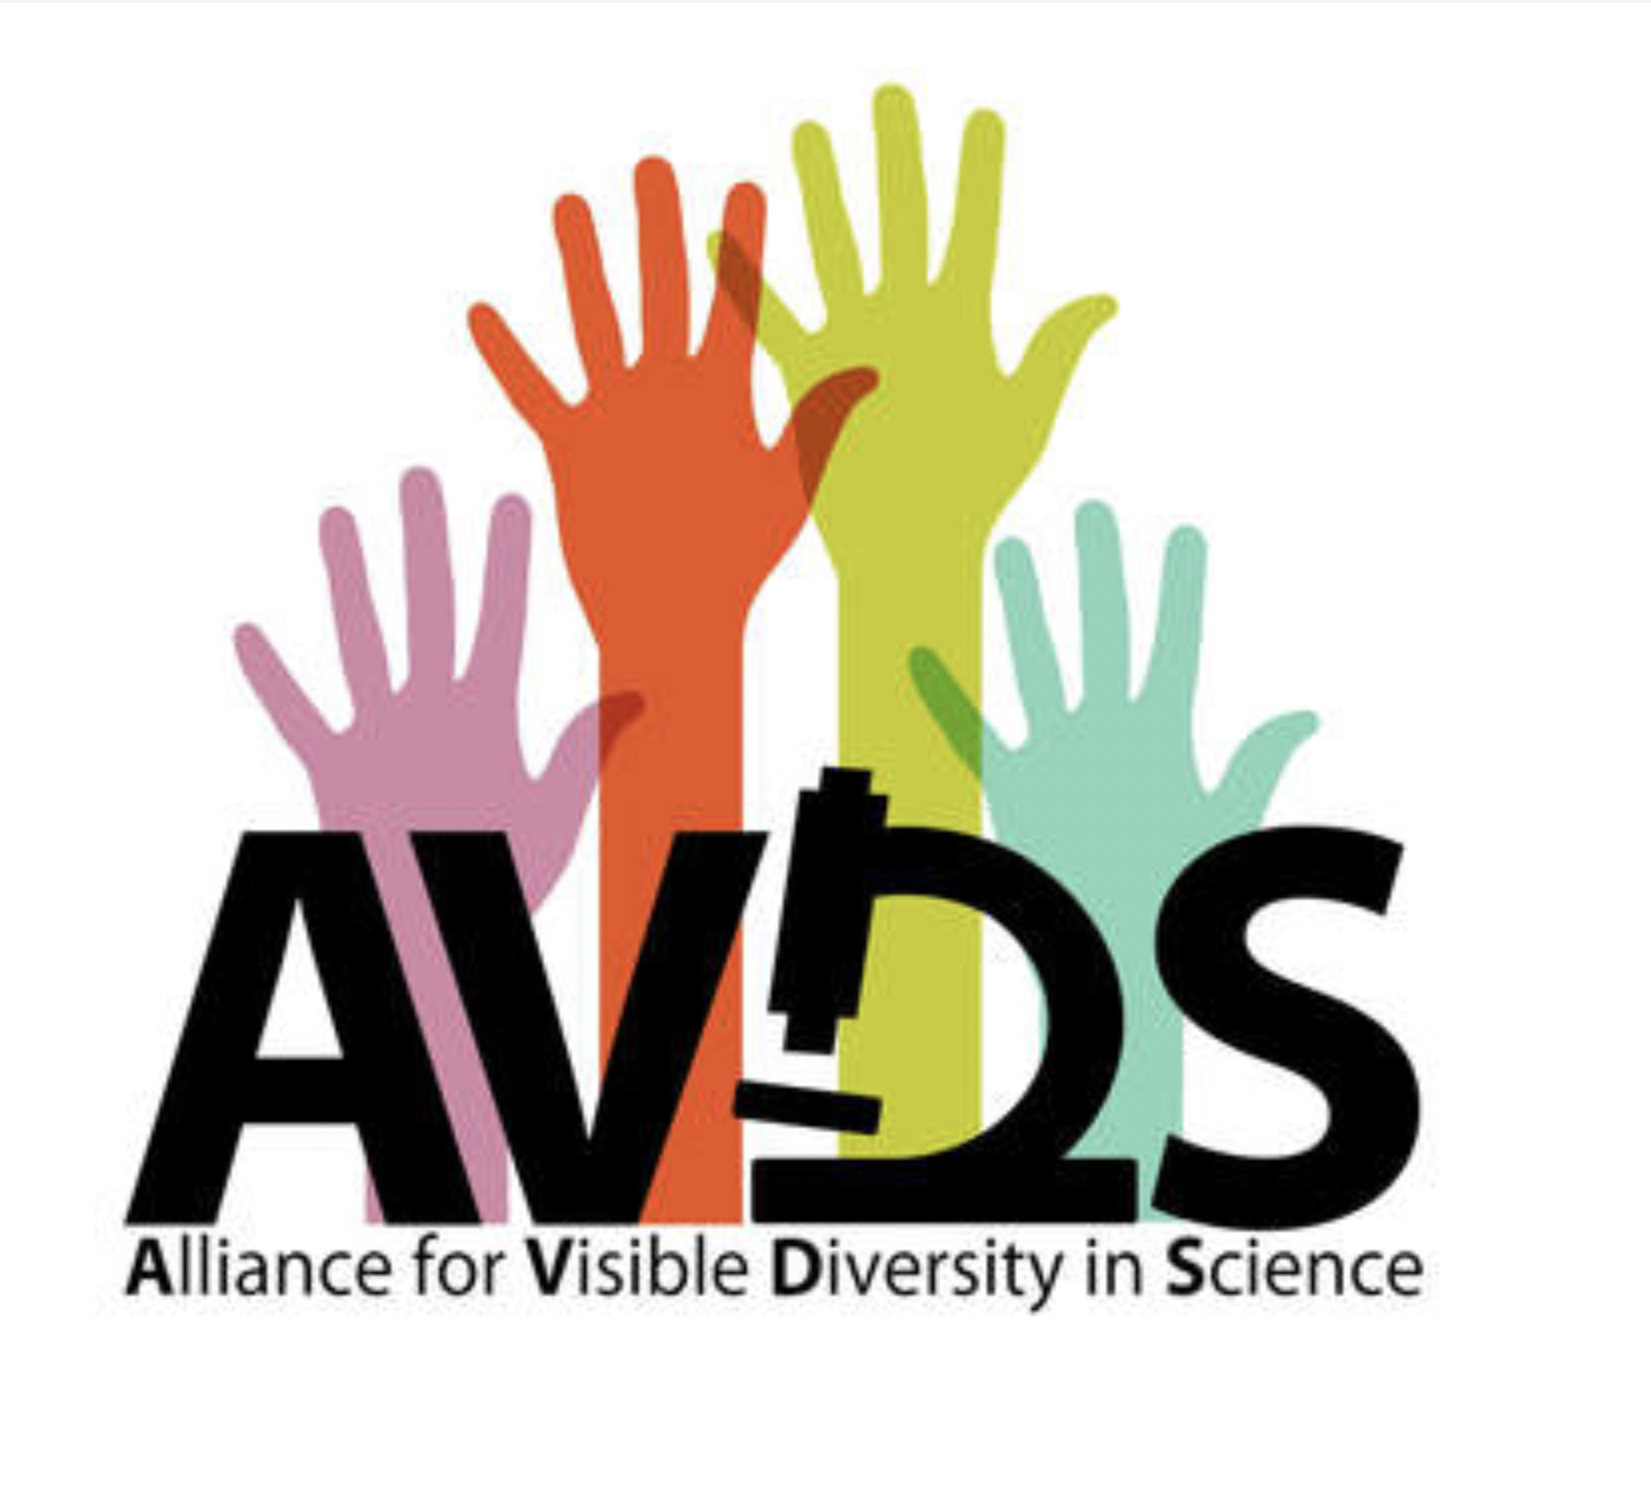 Alliance for Visible Diversity in Science logo